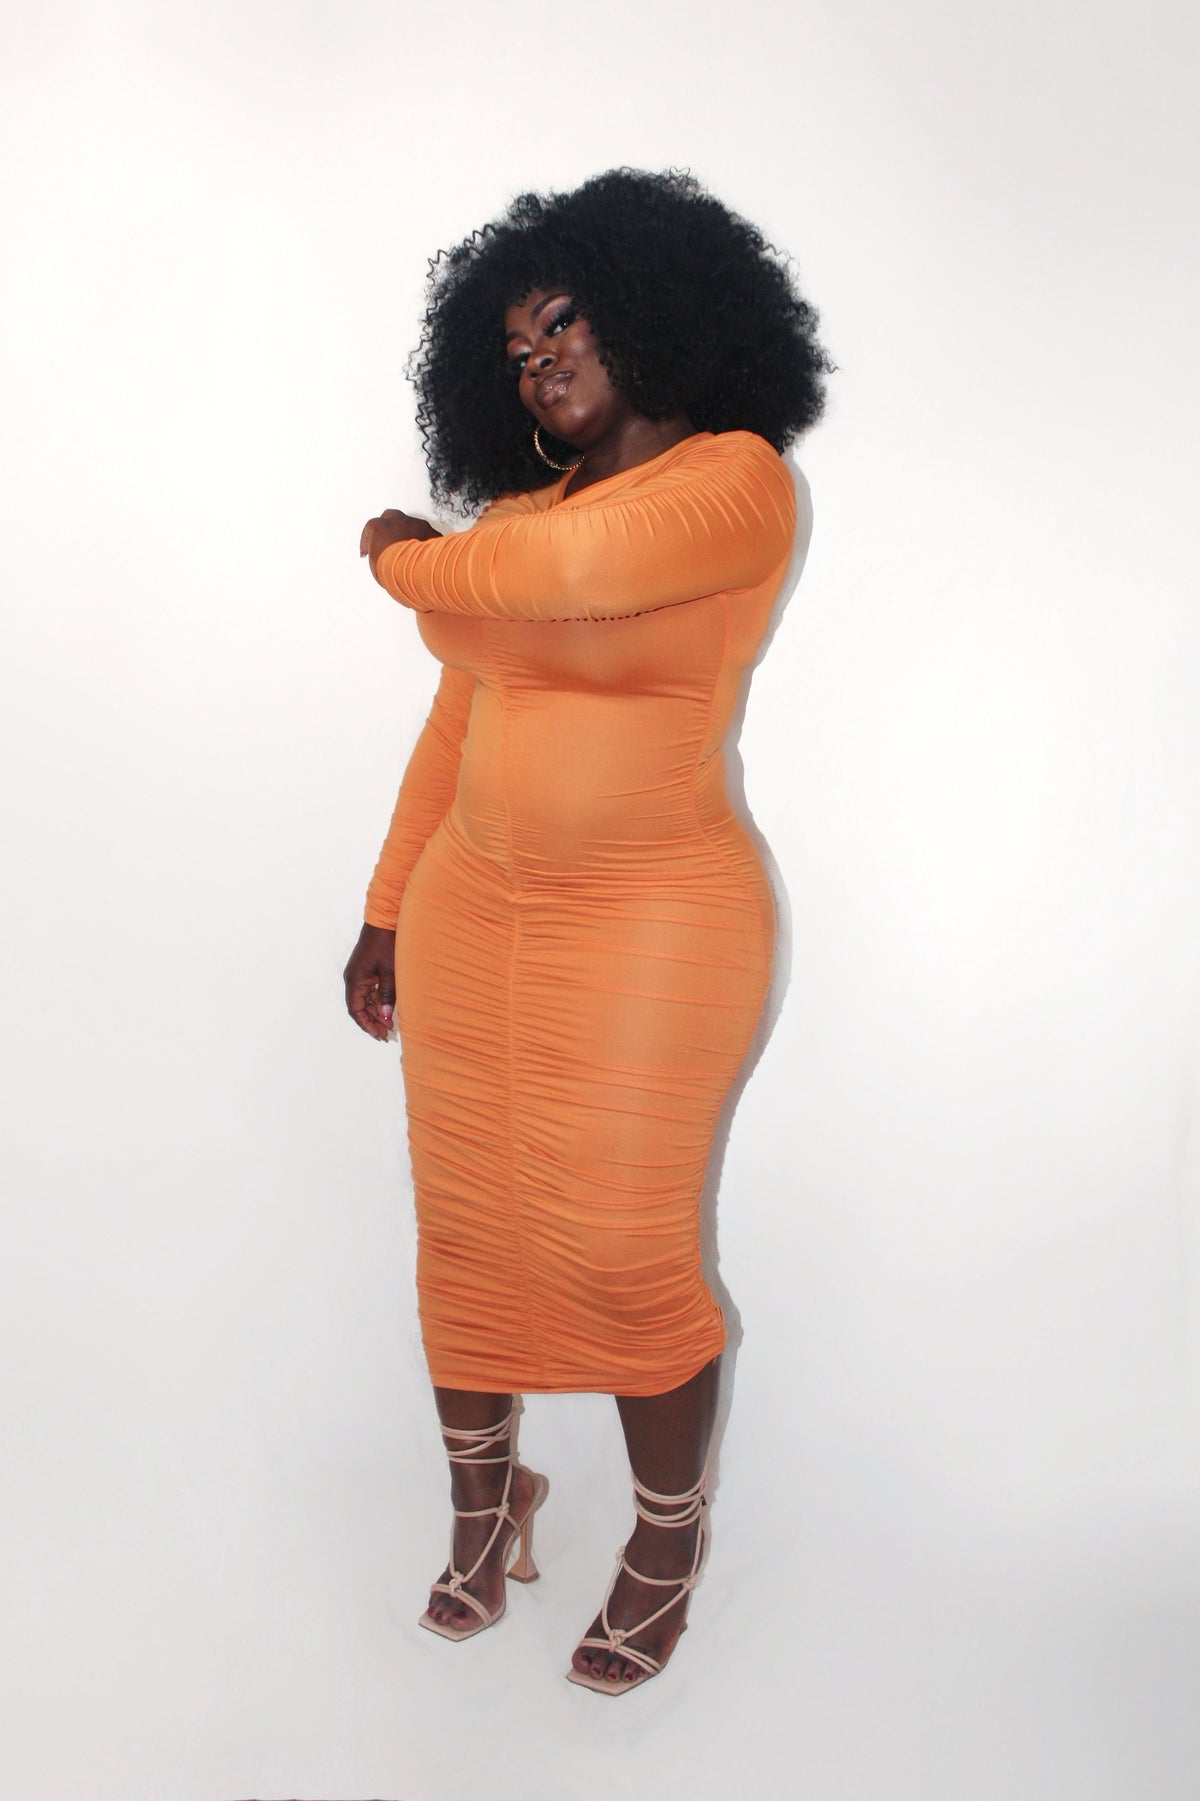 It's Giving Curves Dress